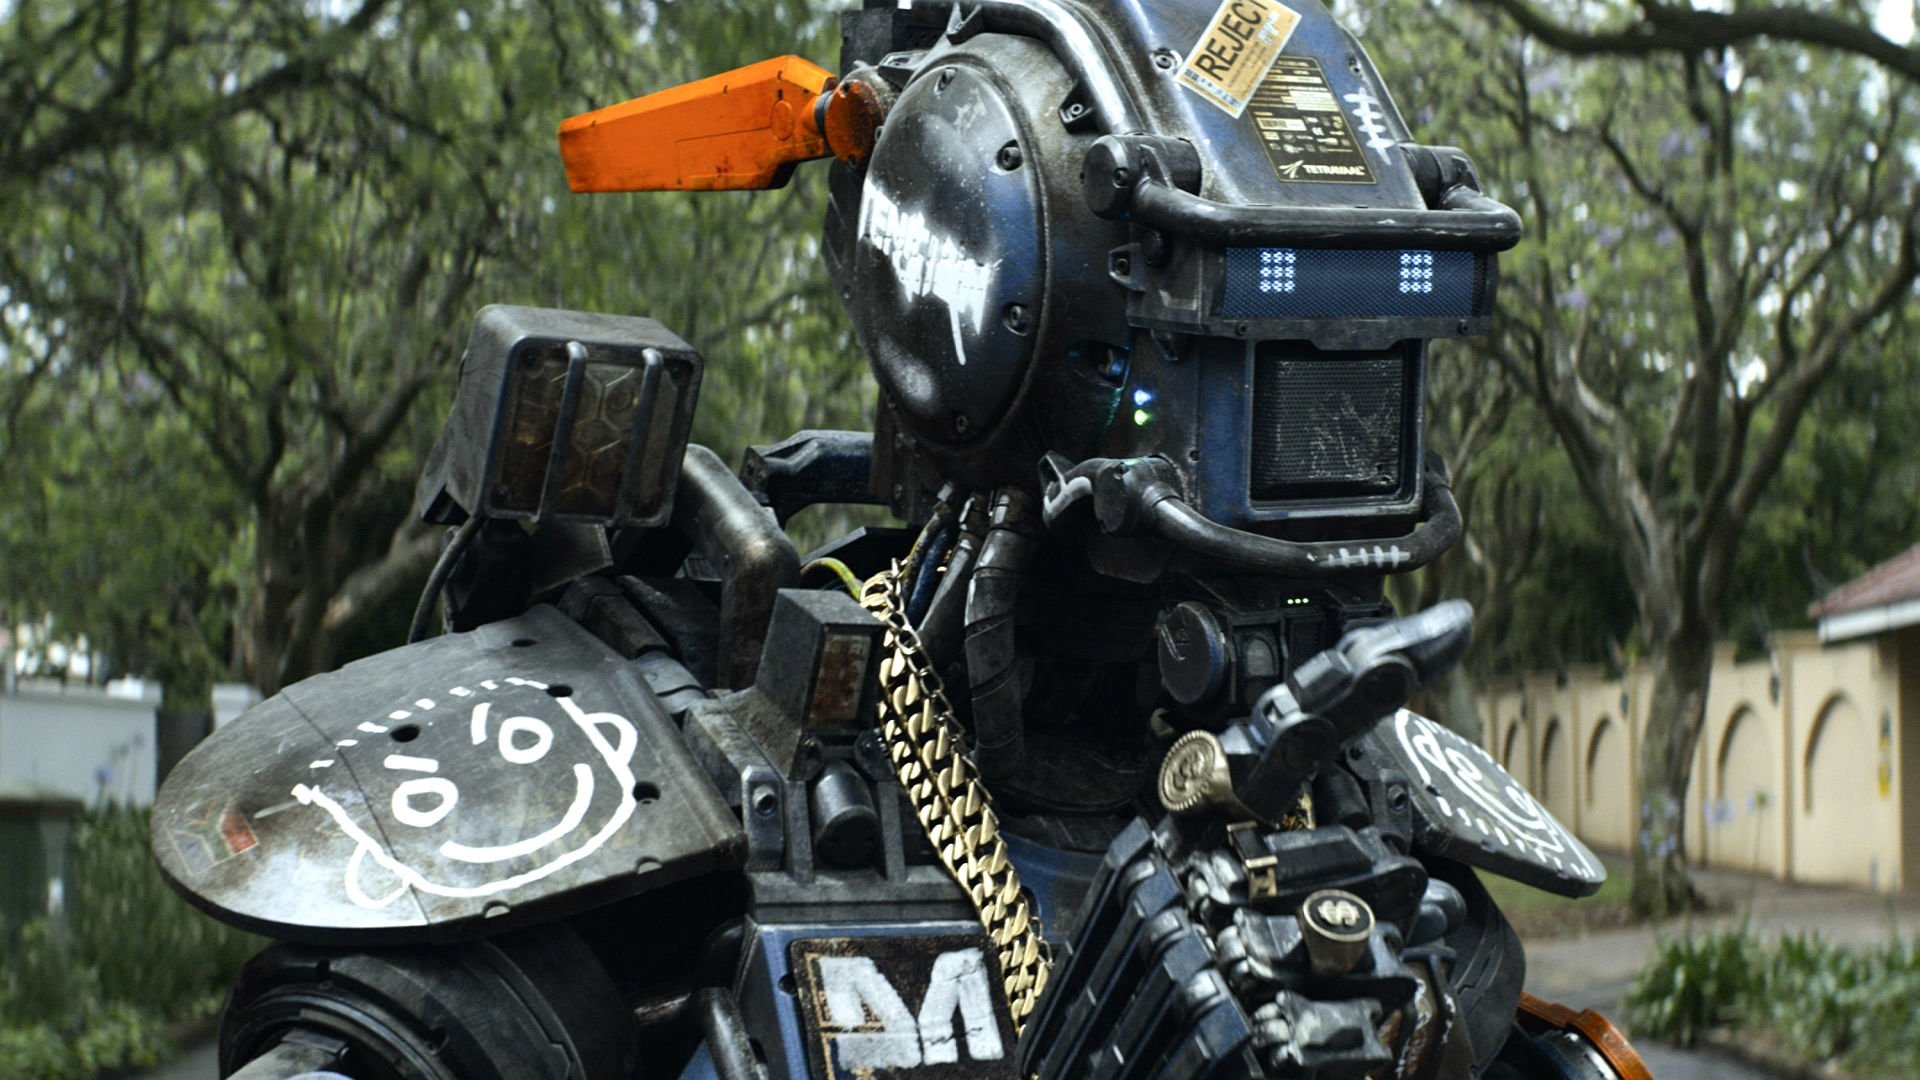 Chappie: Sci-fi, Futuristic, Action, Thriller, Robot, Cyborg, Action. 1920x1080 Full HD Background.